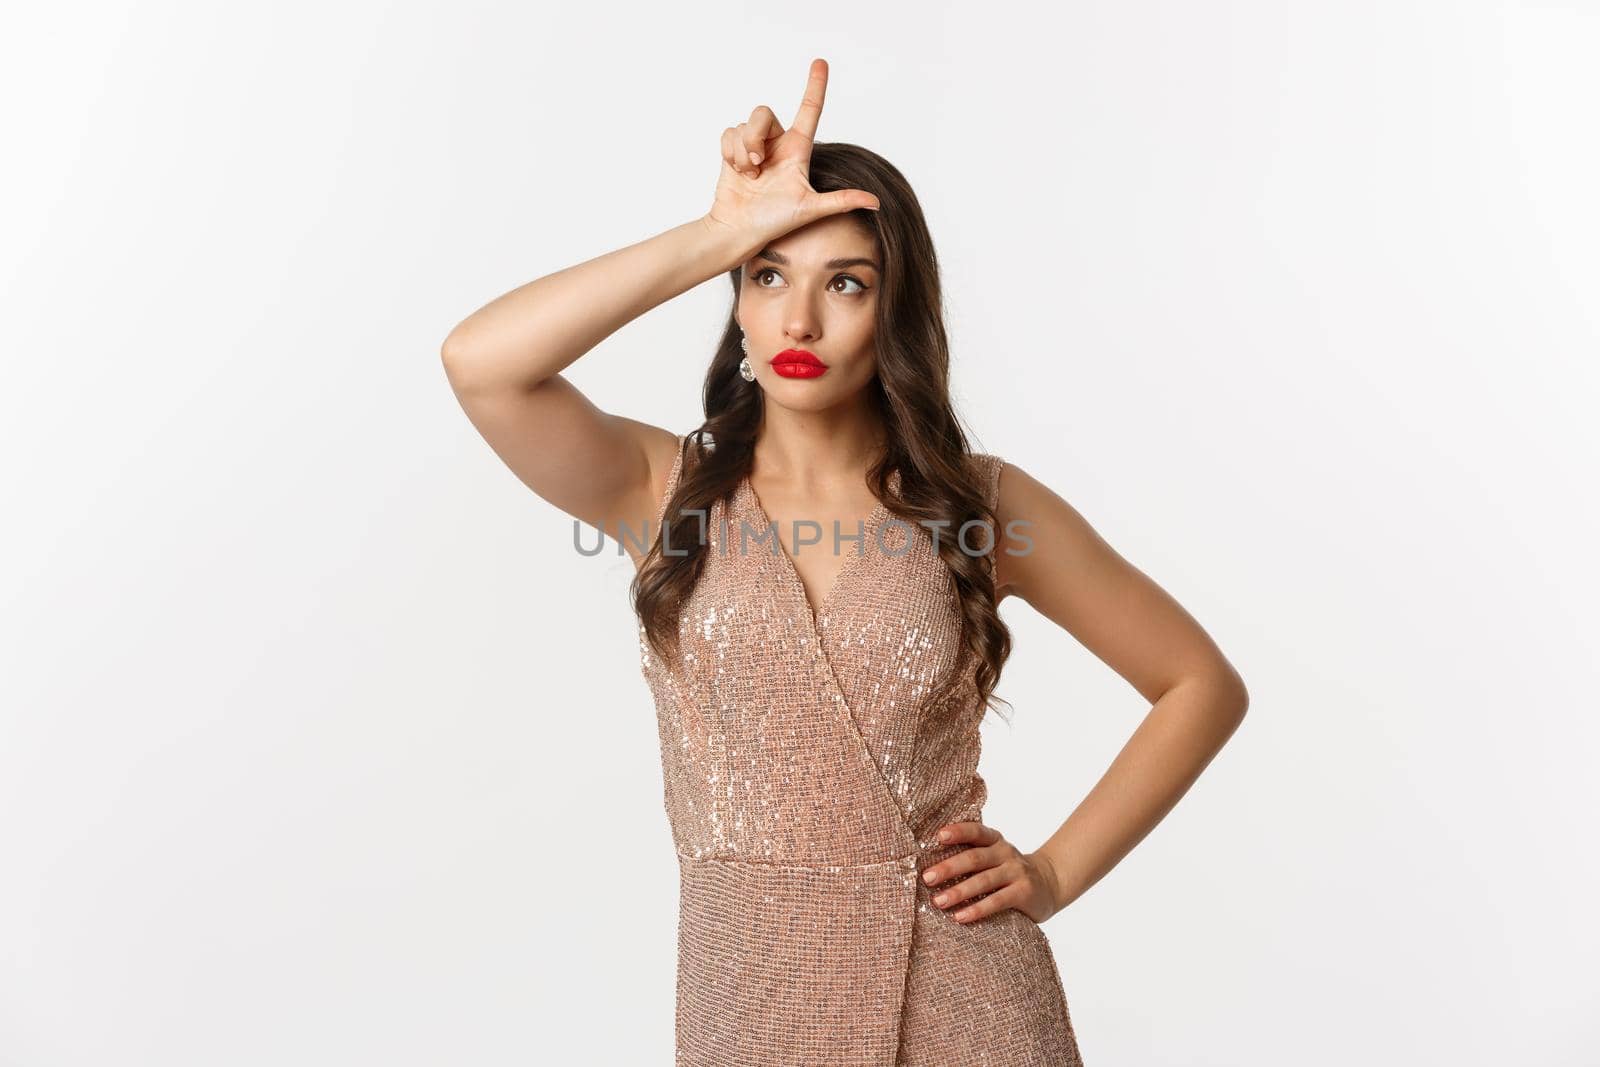 Celebration and party concept. Attractive young woman with red lips, glamour dress, showing loser sign on forehead and looking away ignorant, standing over white background.